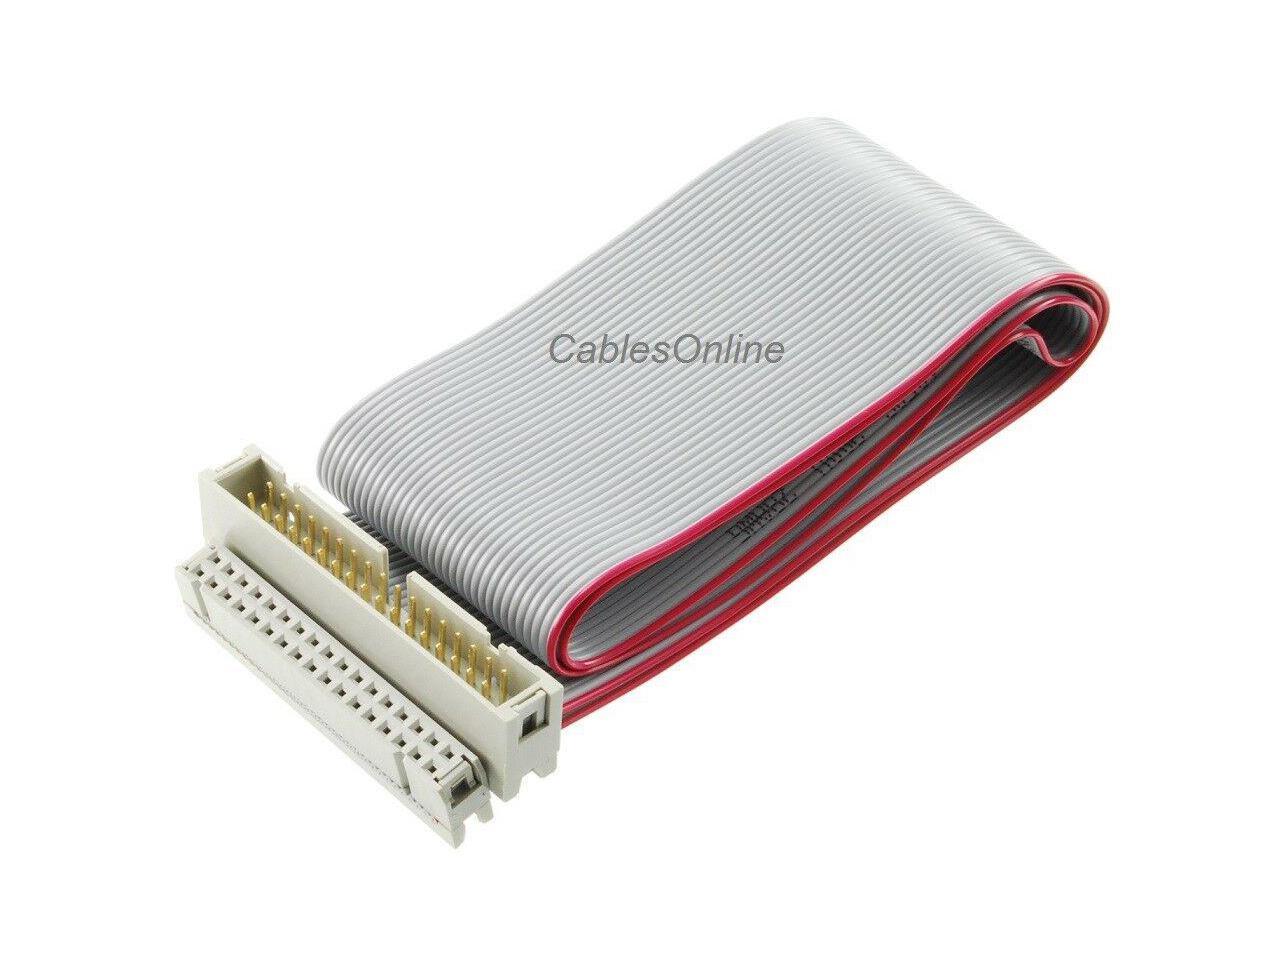 CablesOnline FF-R12R 12inch 34-Pin Round IDC Floppy 1-Drive/Device Red Cable 